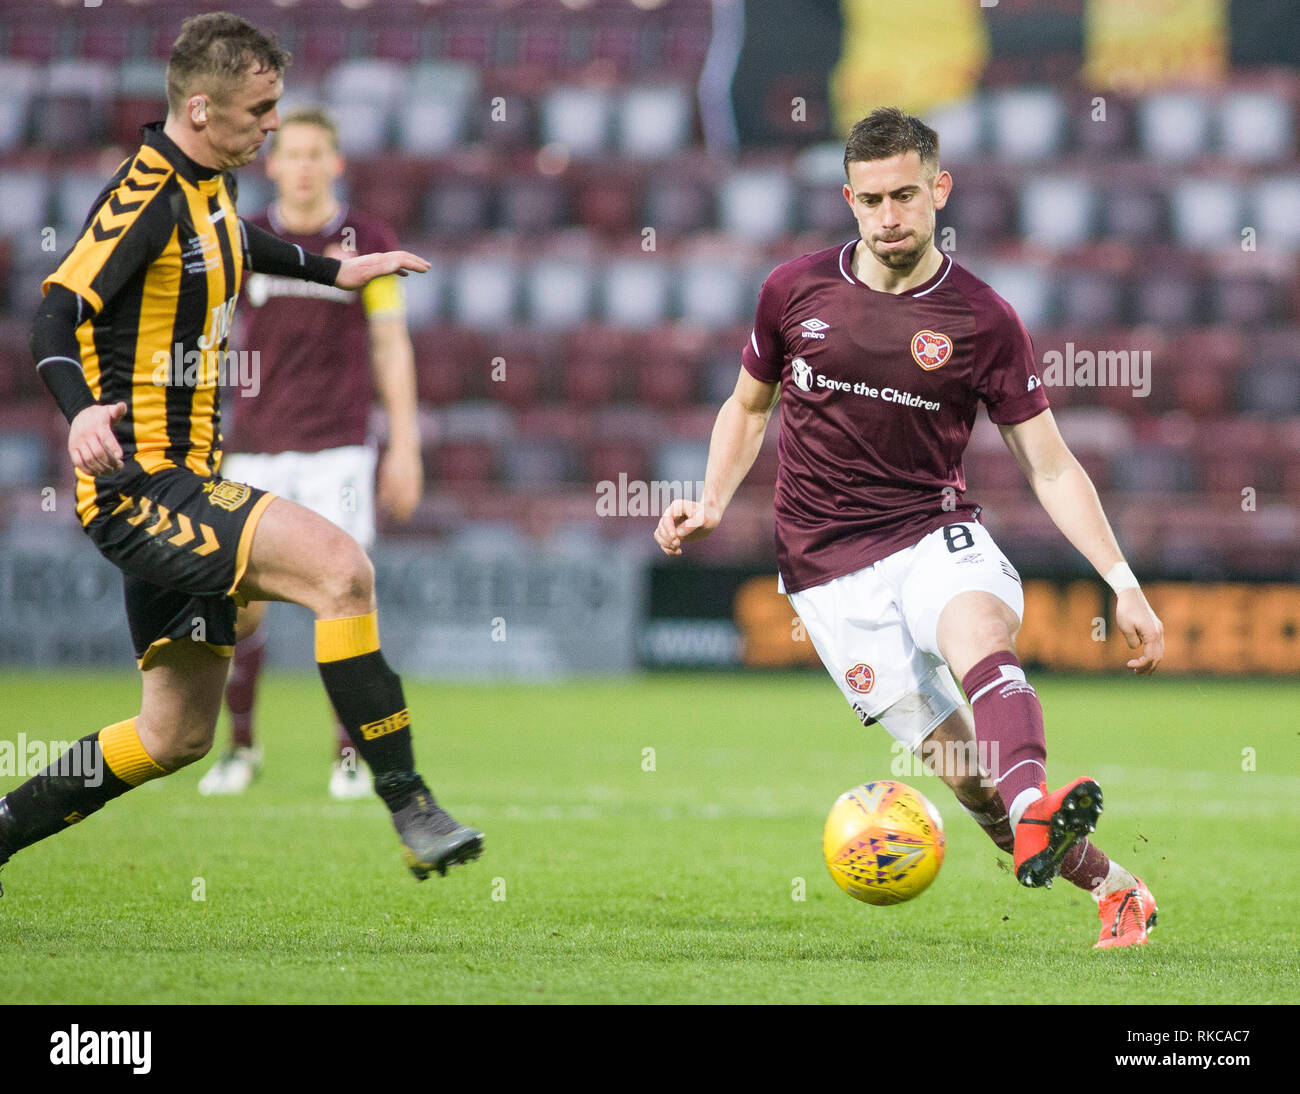 Tynecastle Park, Edinburgh, Scotland, UK. 10th February 2019. Football. Fifth round of the William Hill Scottish Cup match between Hearts and Auchinleck Talbot; Oliver Lee of Hearts  Credit: Scottish Borders Media/Alamy Live News Stock Photo